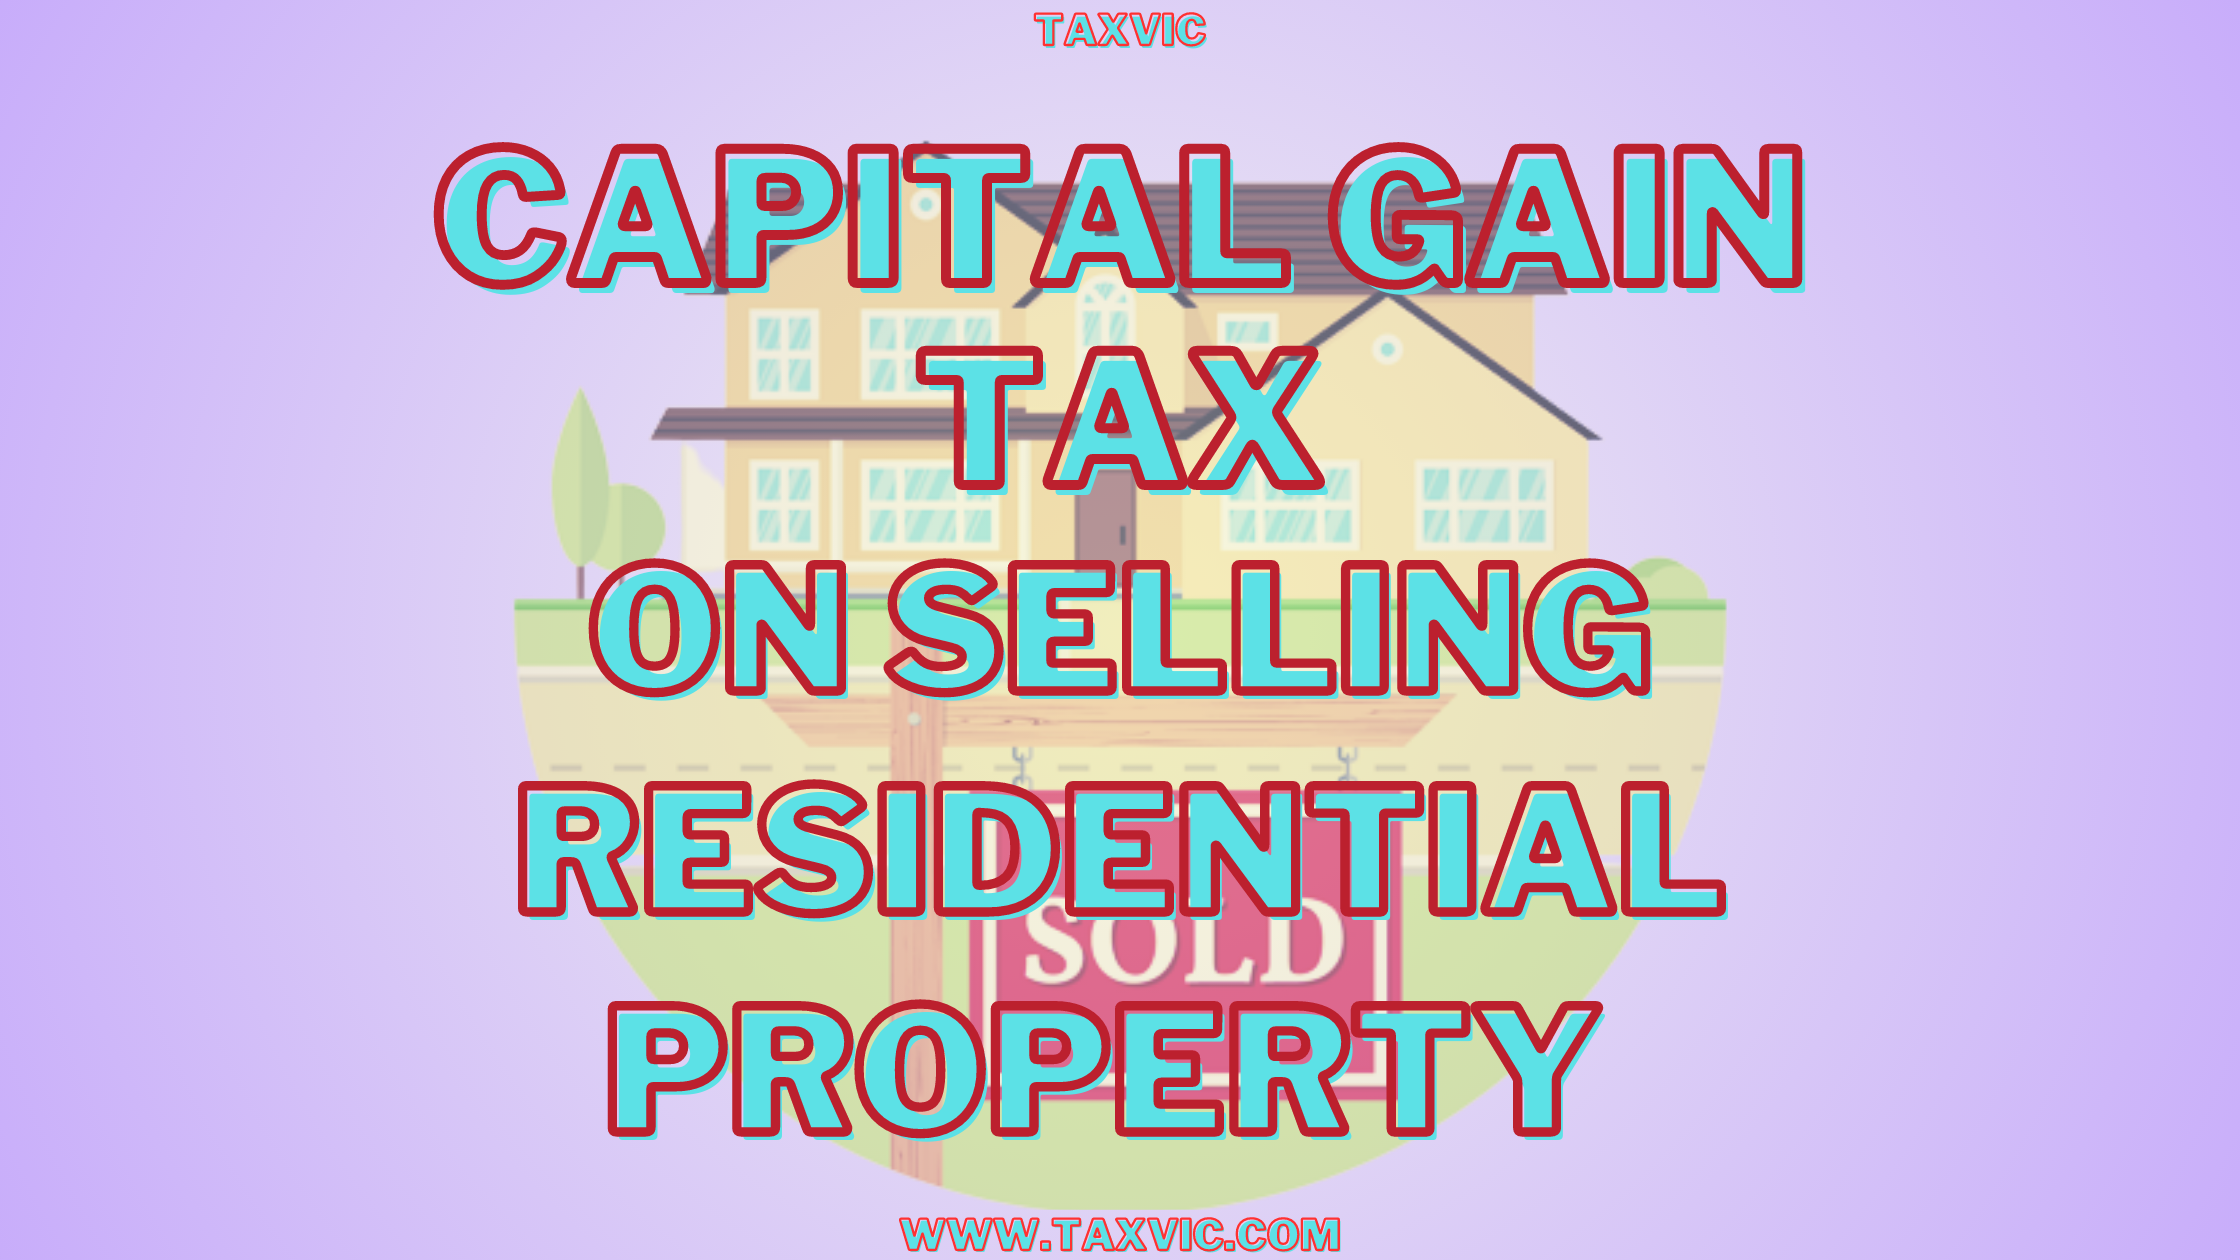 Capital gains tax in India,Selling residential property,Capital gains tax implications,Save on capital gains taxes